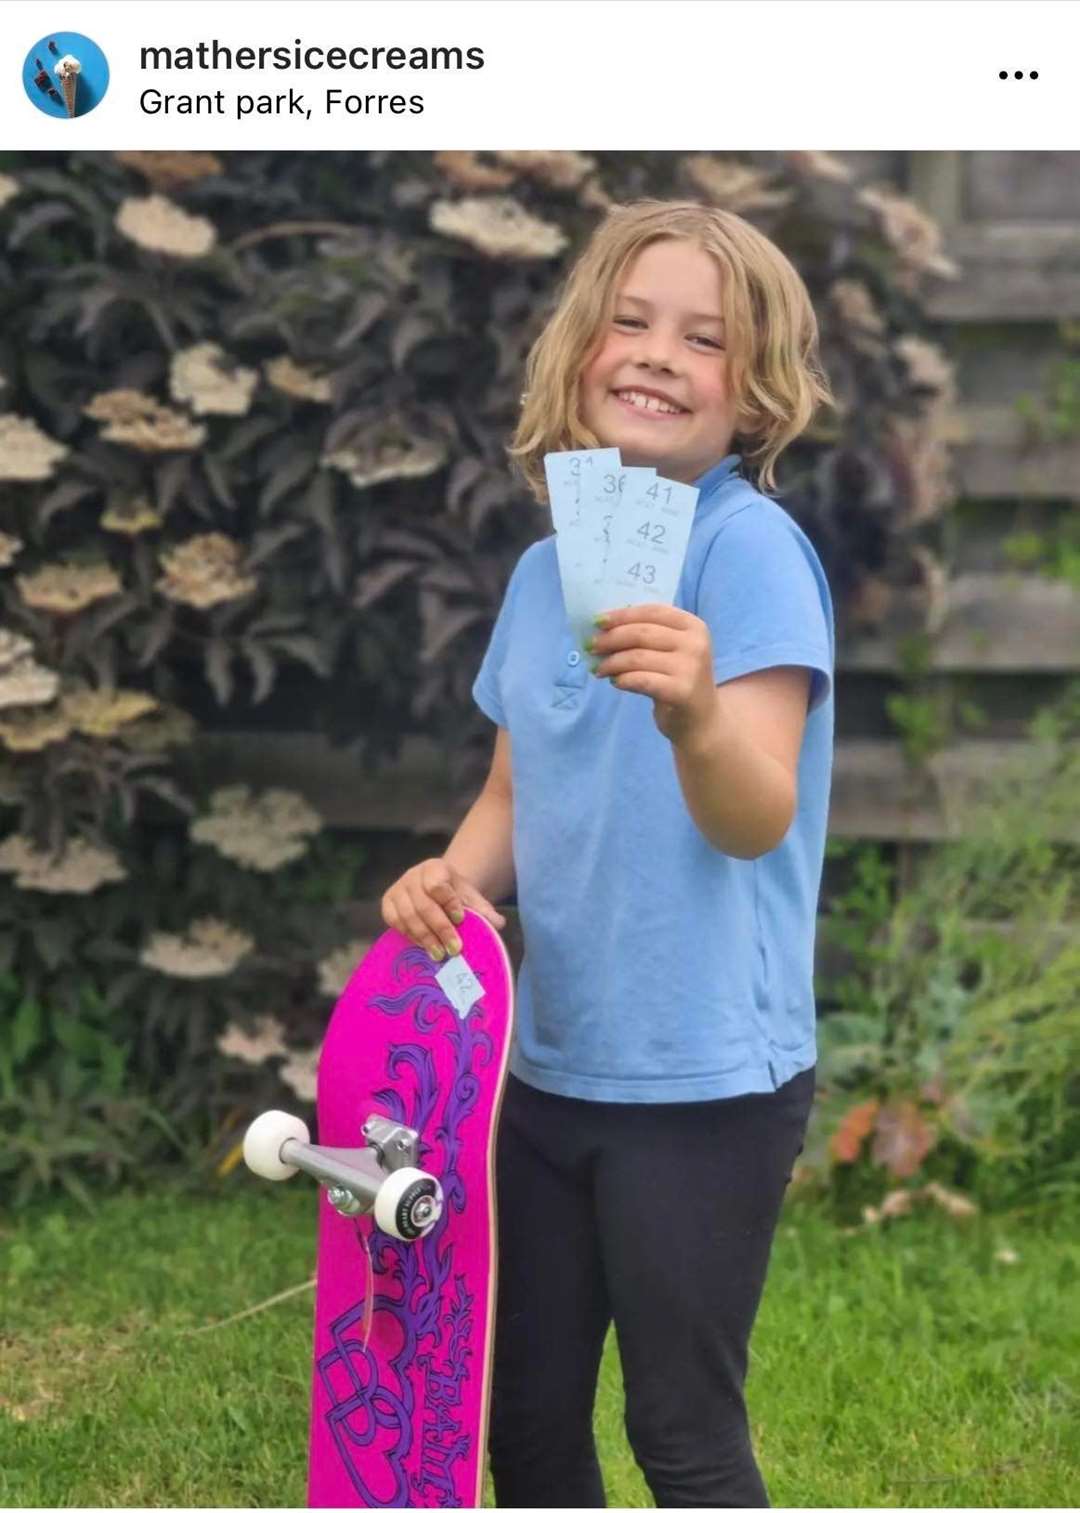 Ava Mathers won a skateboard at the event in a raffle.